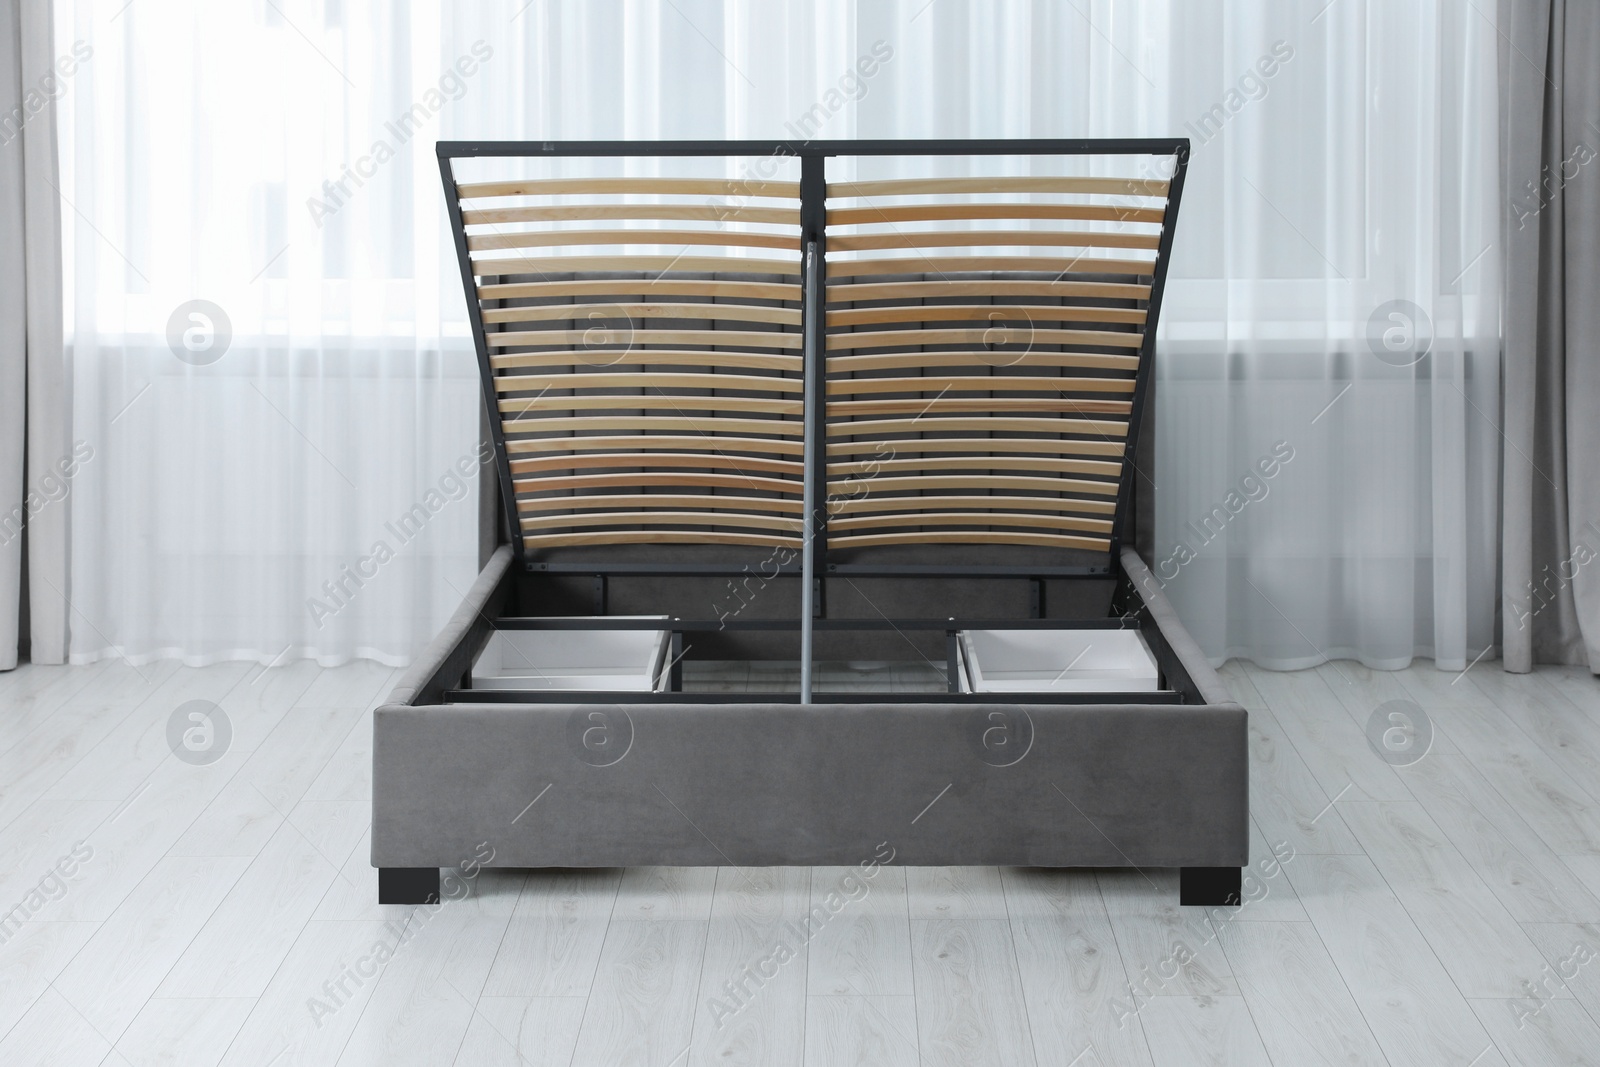 Photo of Modern bed with storage space for bedding under lifted slatted base in room